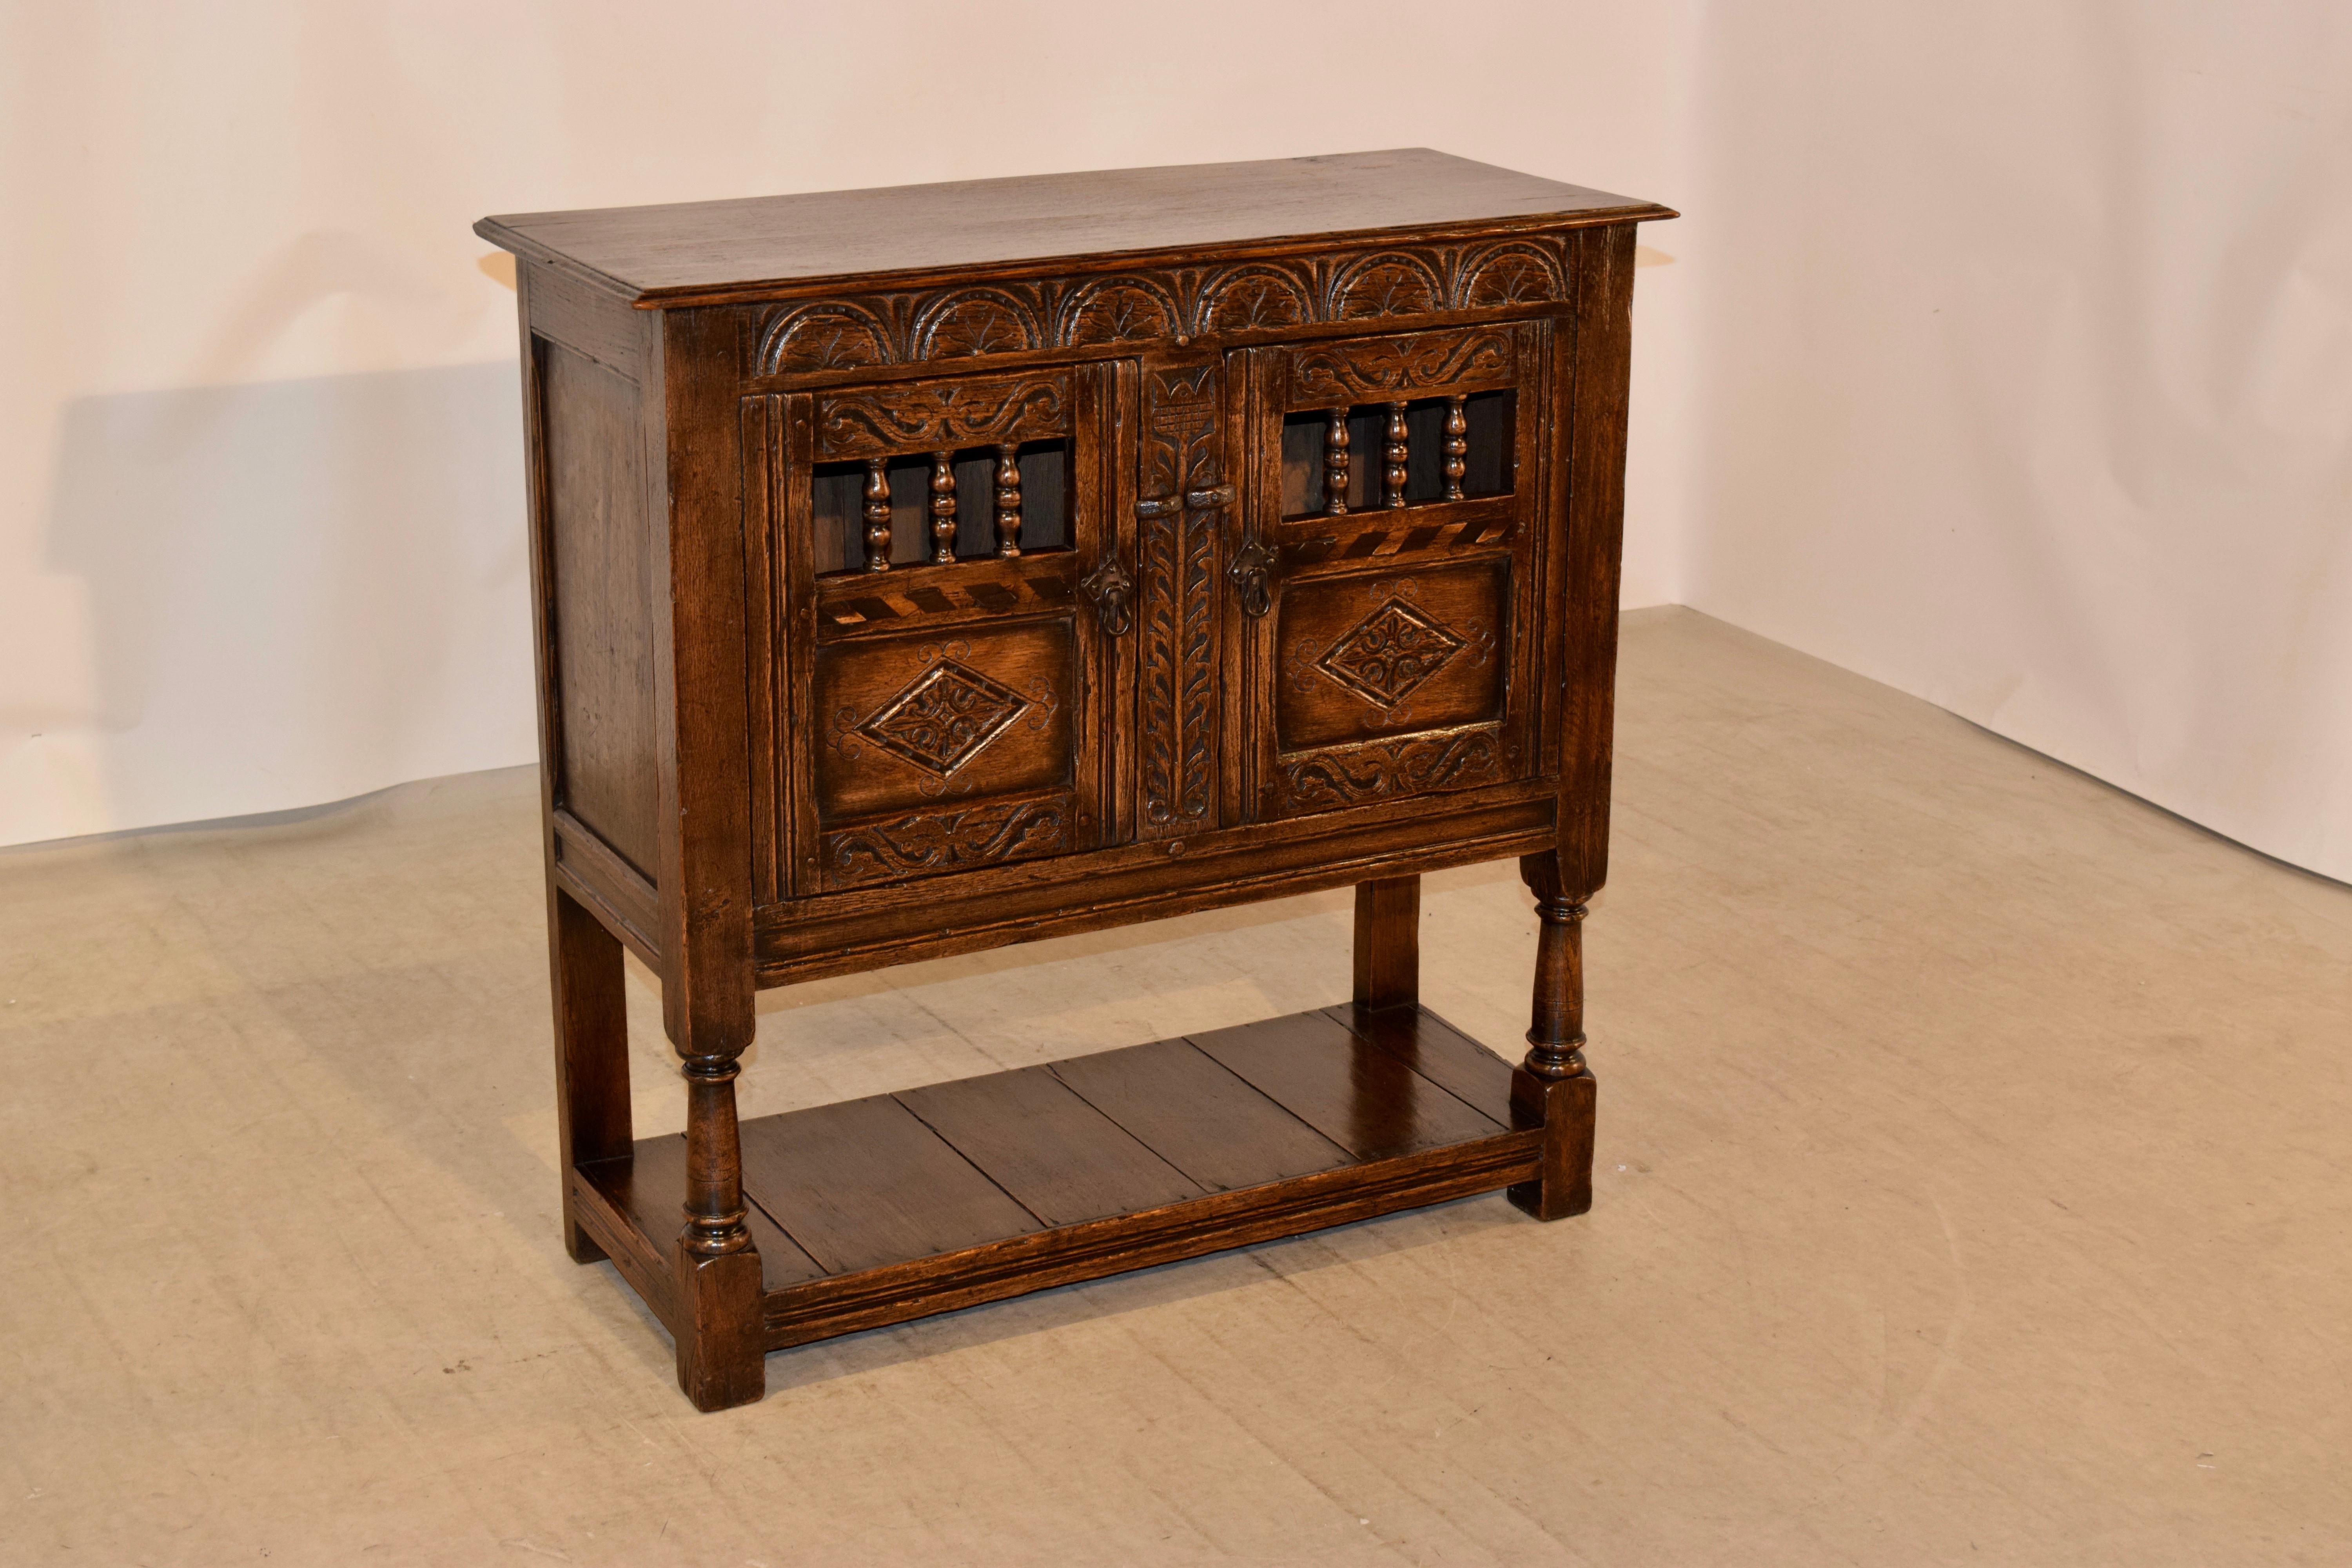 Late 19th century English oak server from the Ipswitch region of England. The top has a beveled edge and follows down to paneled sides and two paneled doors in the front which open to reveal storage. The legs are hand turned in the front and simple